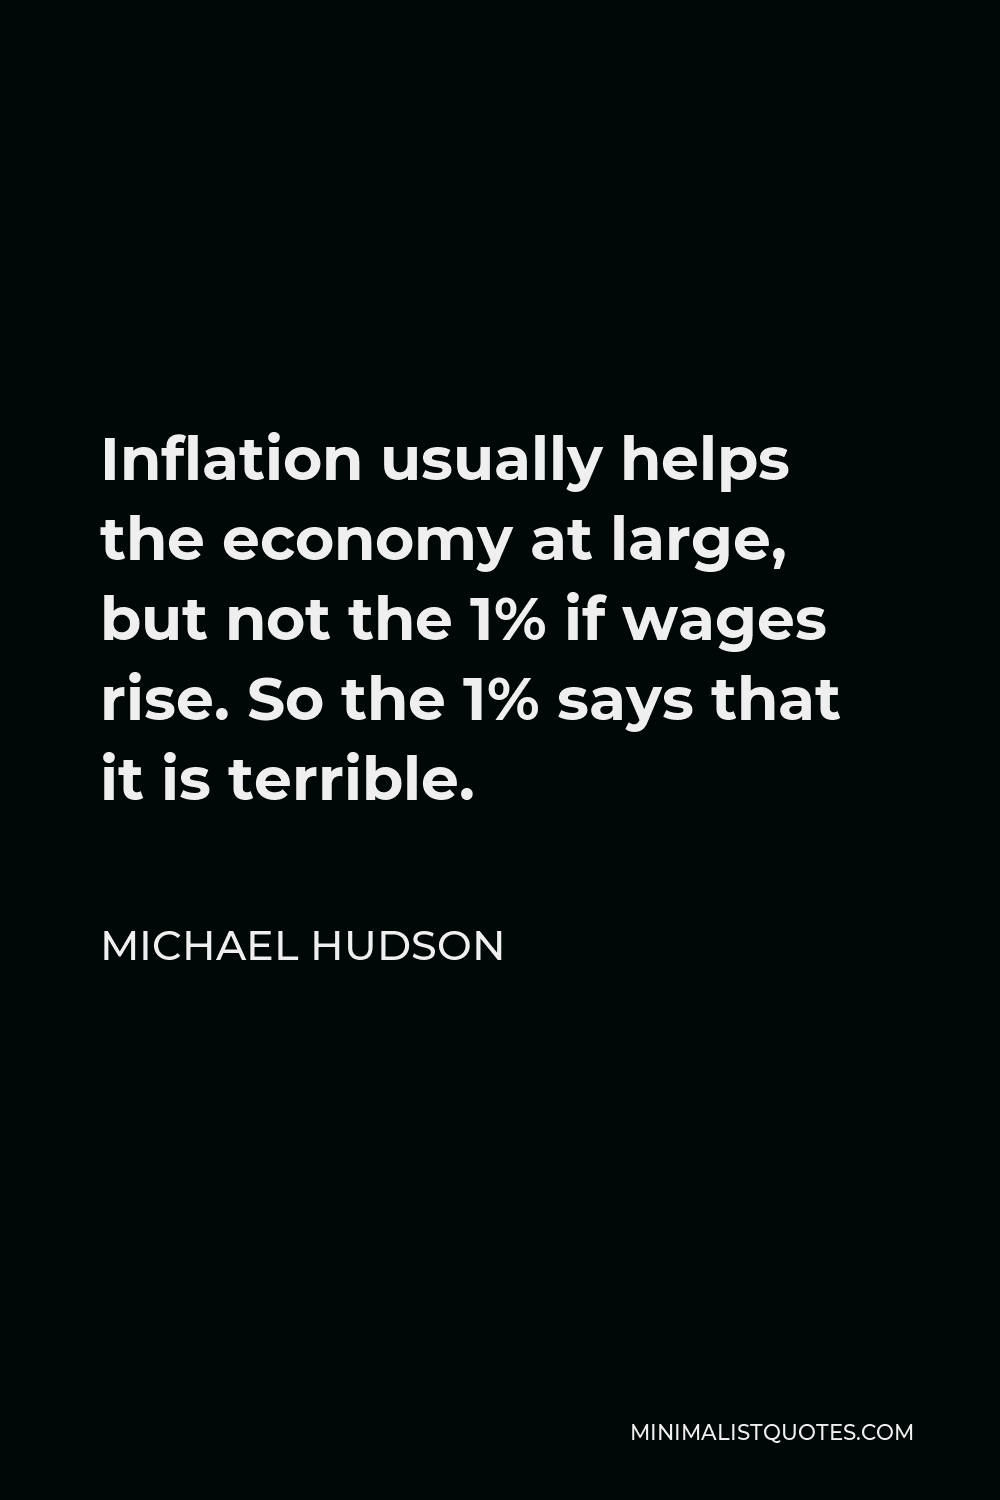 Michael Hudson Quote - Inflation usually helps the economy at large, but not the 1% if wages rise. So the 1% says that it is terrible.